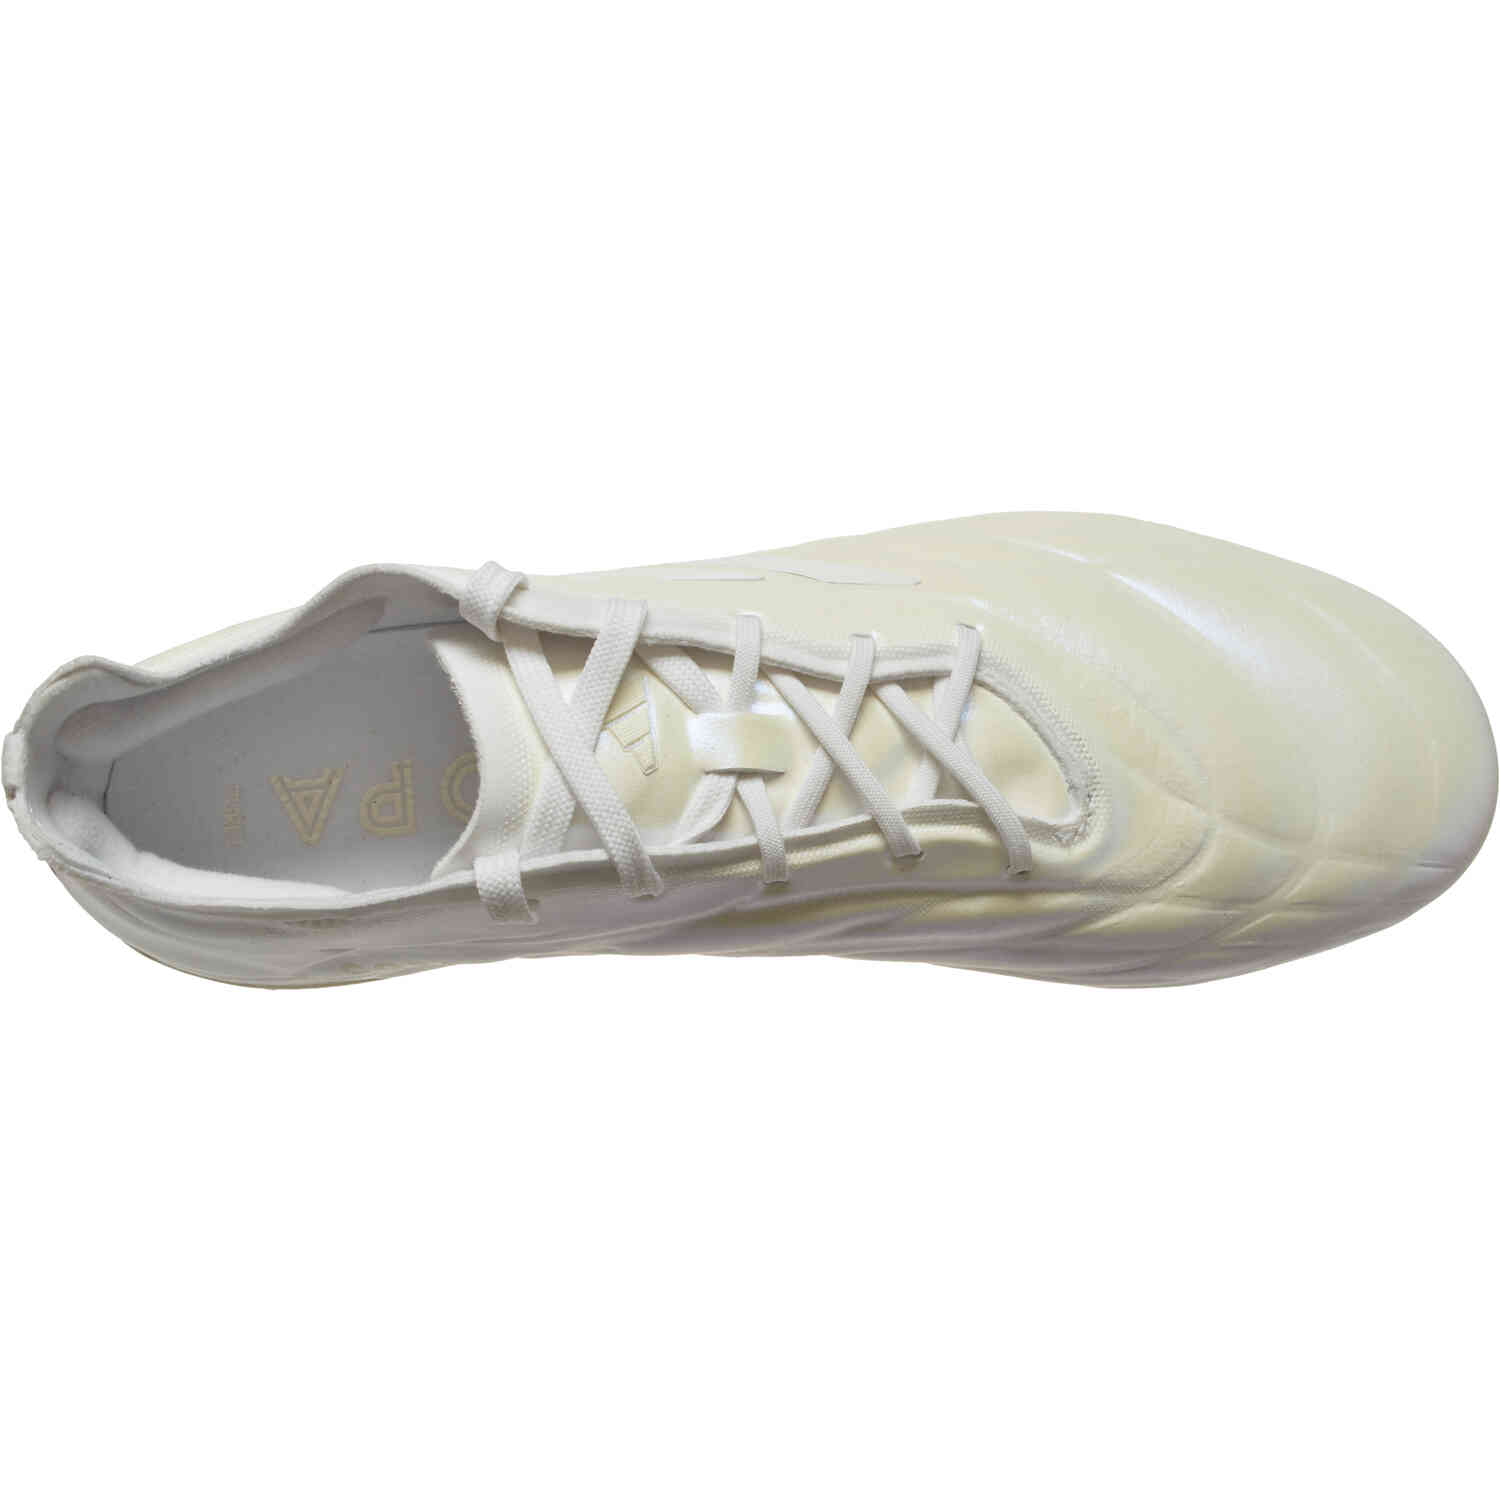 adidas Copa Pure.1 FG – Pearlized Pack